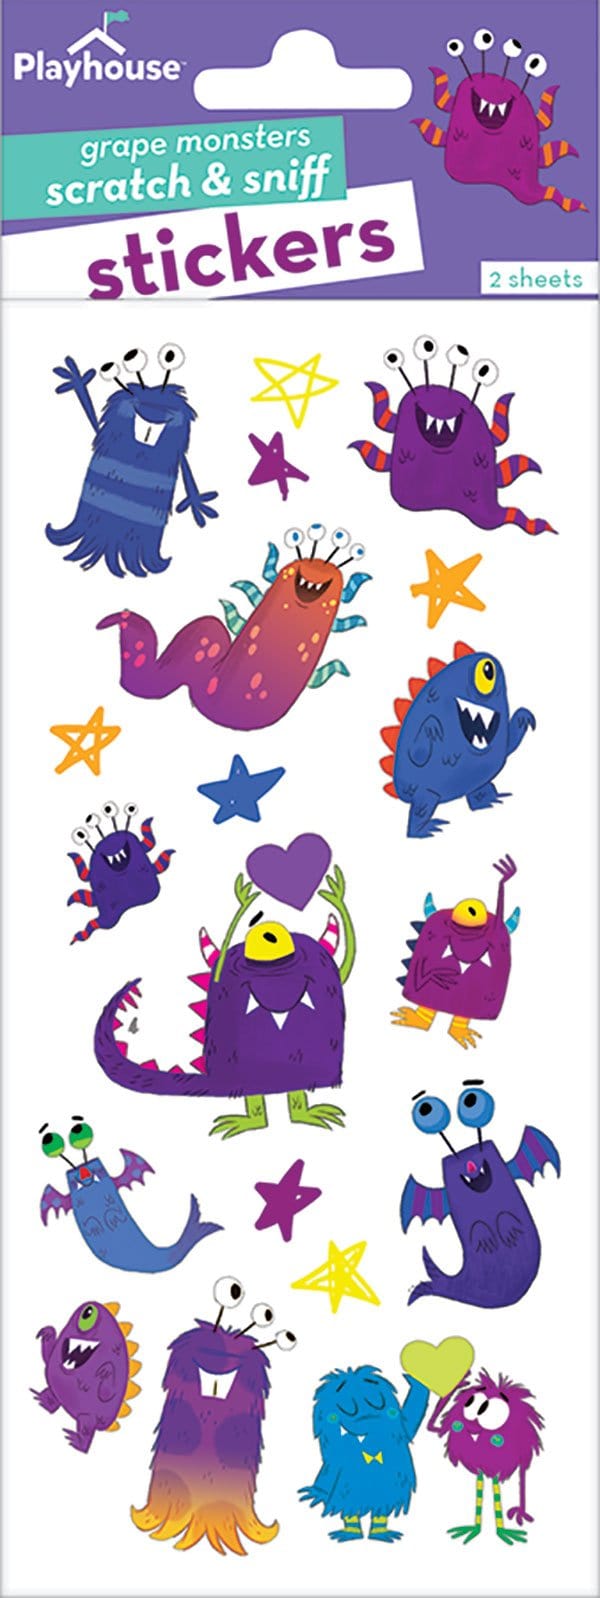 Scratch And Sniff Stickers - Grape